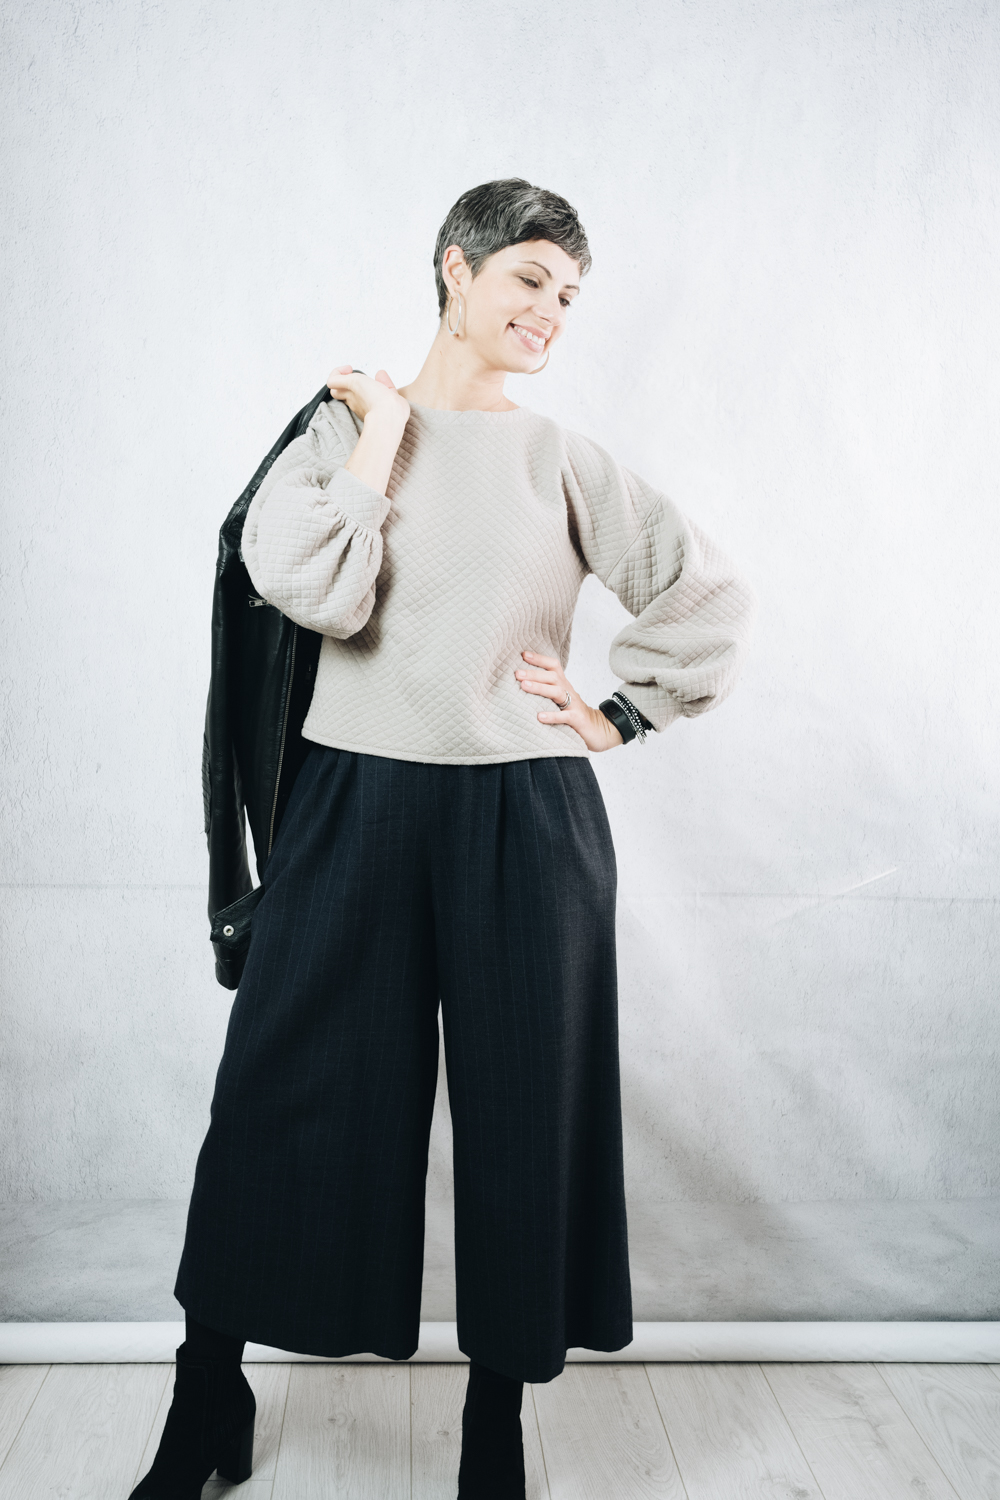 Beige DIY quilted ballon sleeve sweatshirt, hacked from Fiber Mood Nala pattern, worn with wide pinstripe wool culottes and block heel suede ankle boots.
Clothes sewing | handmade | style OOTD